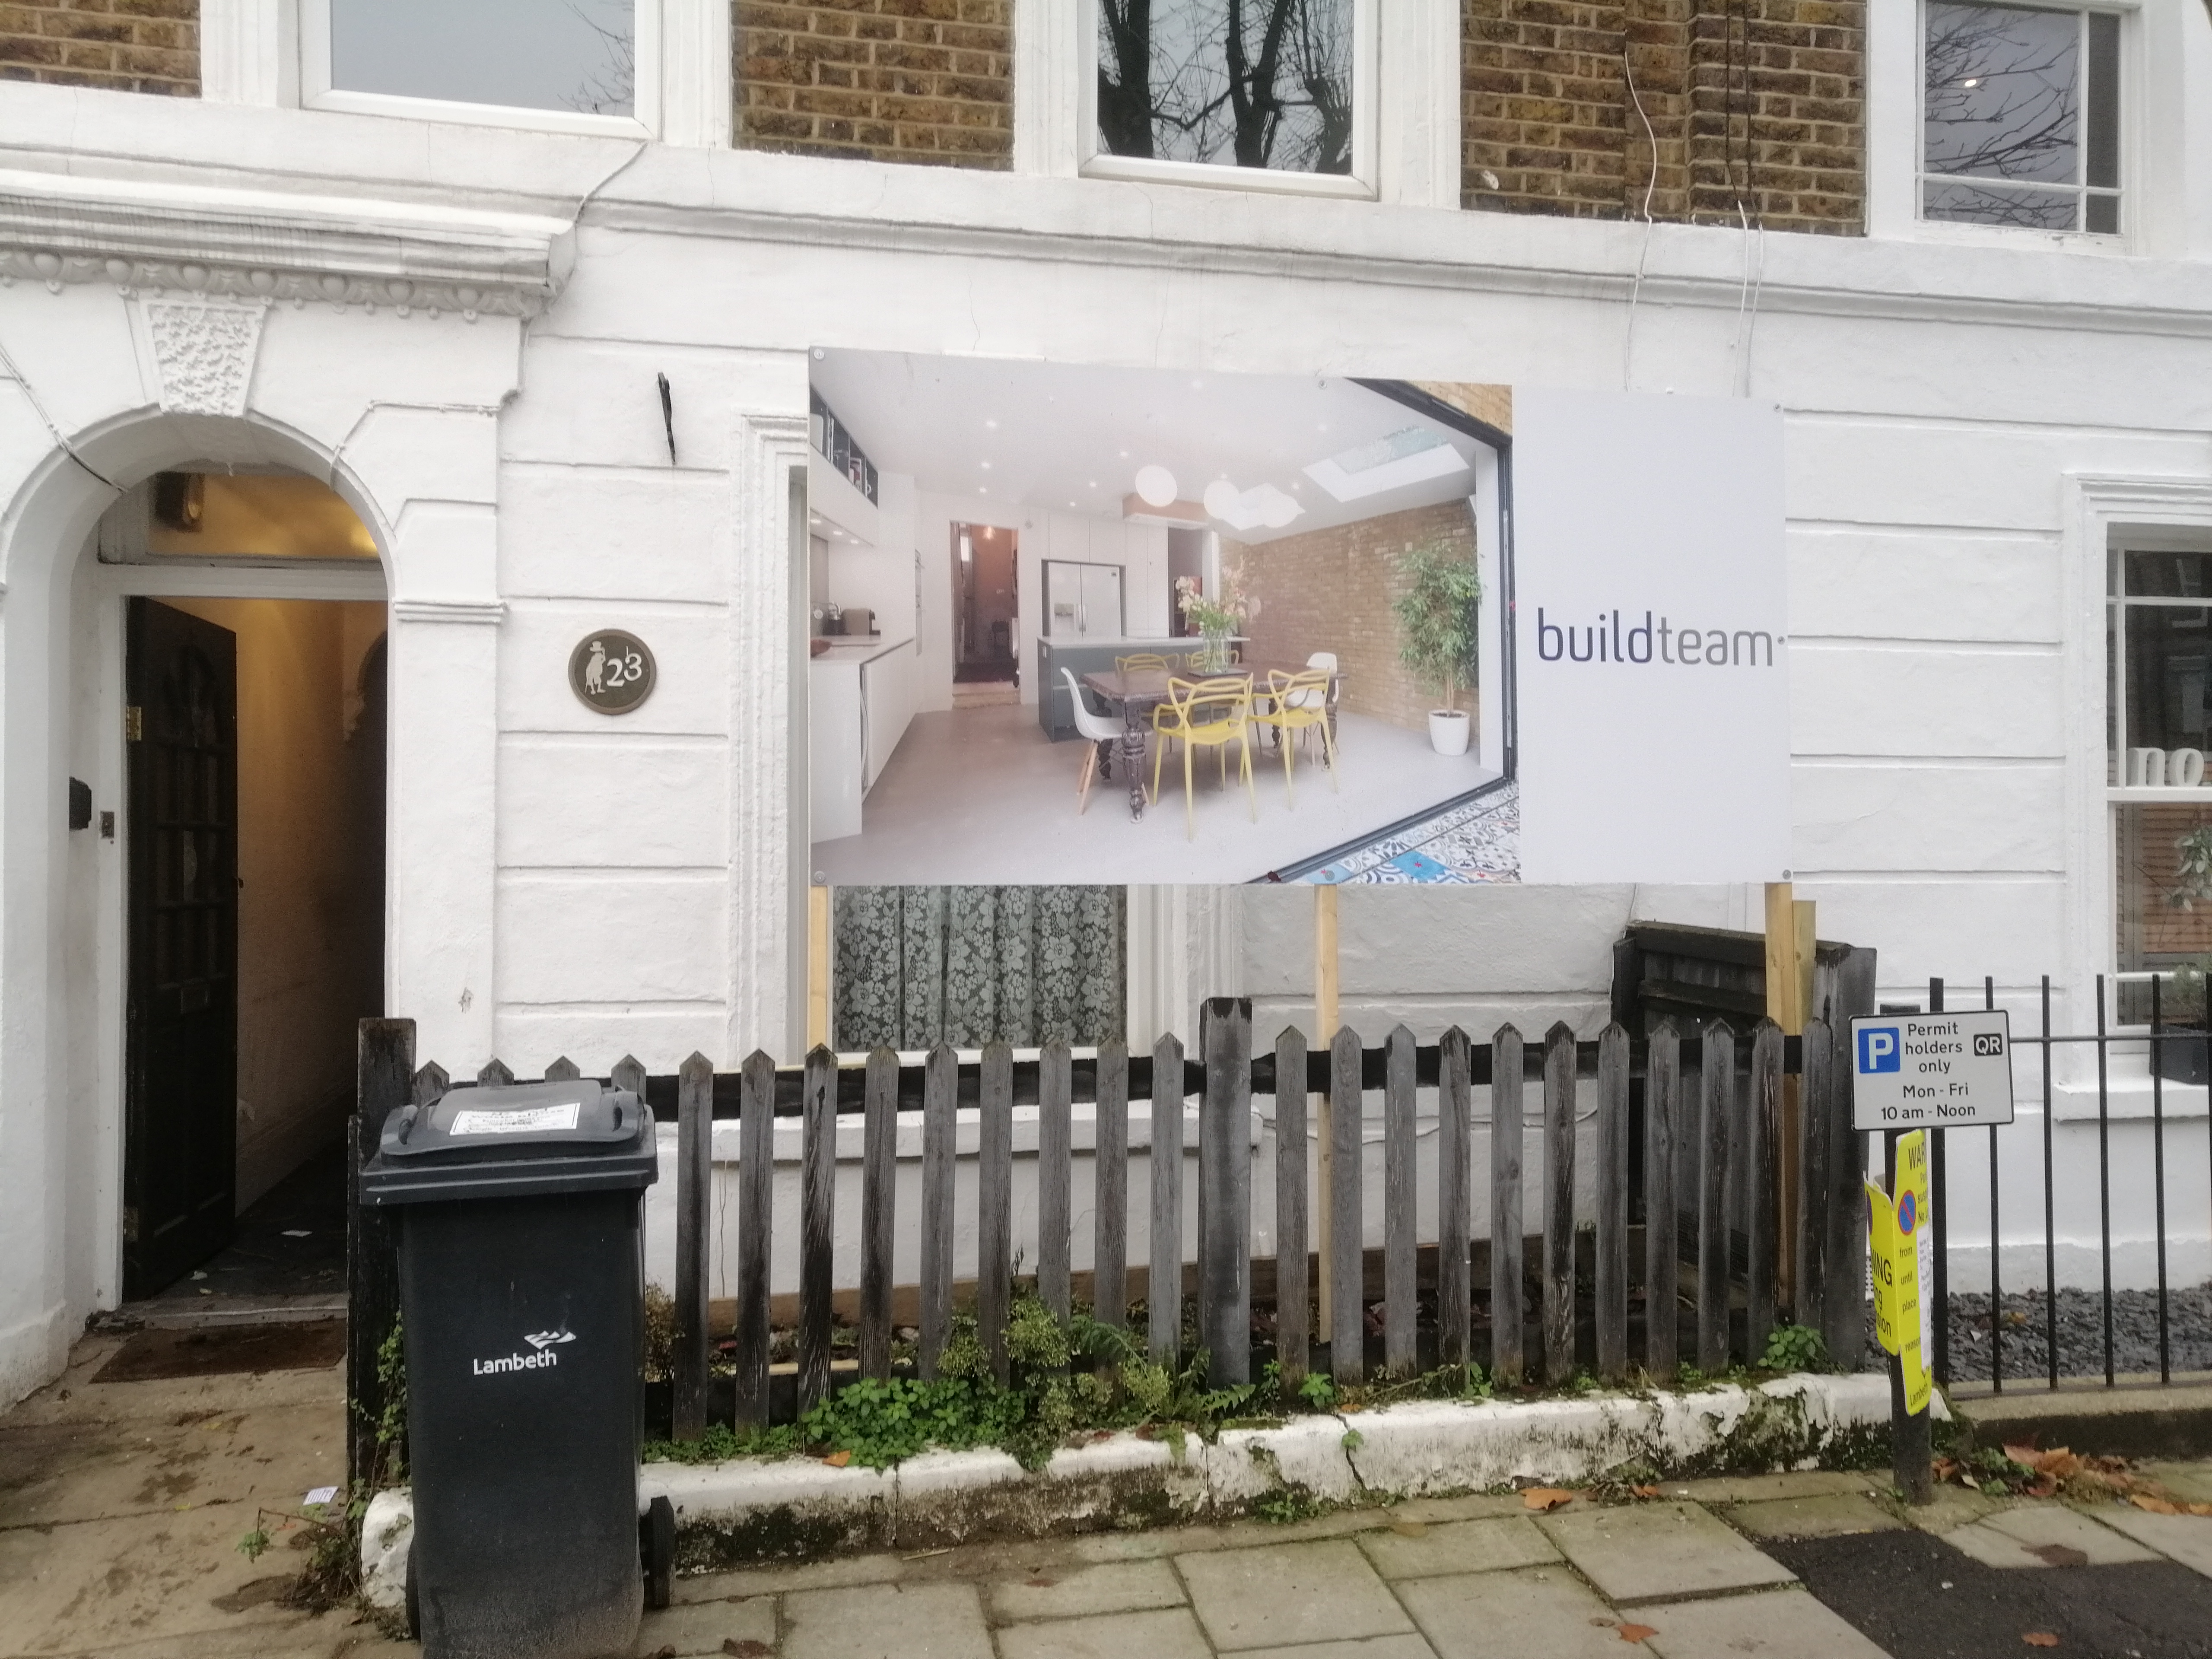 Making excellent progress on our build in Highgate, N19